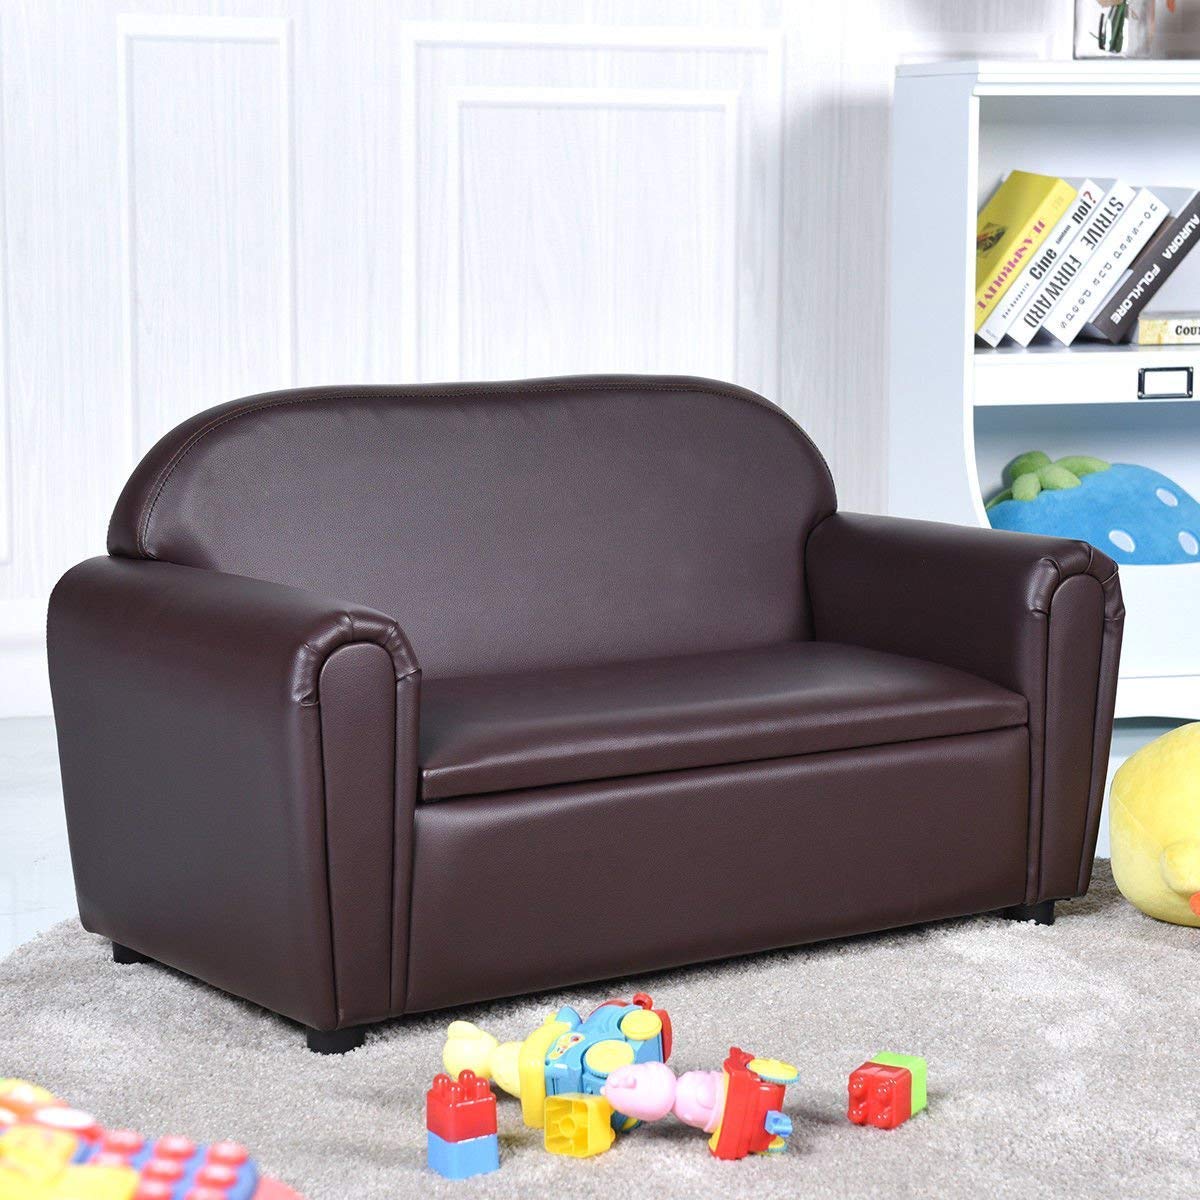 Costzon Kids Sofa, Upholstered Couch, Sturdy Wood Construction, Armrest Chair for Preschool Children, Couch with Storage Box